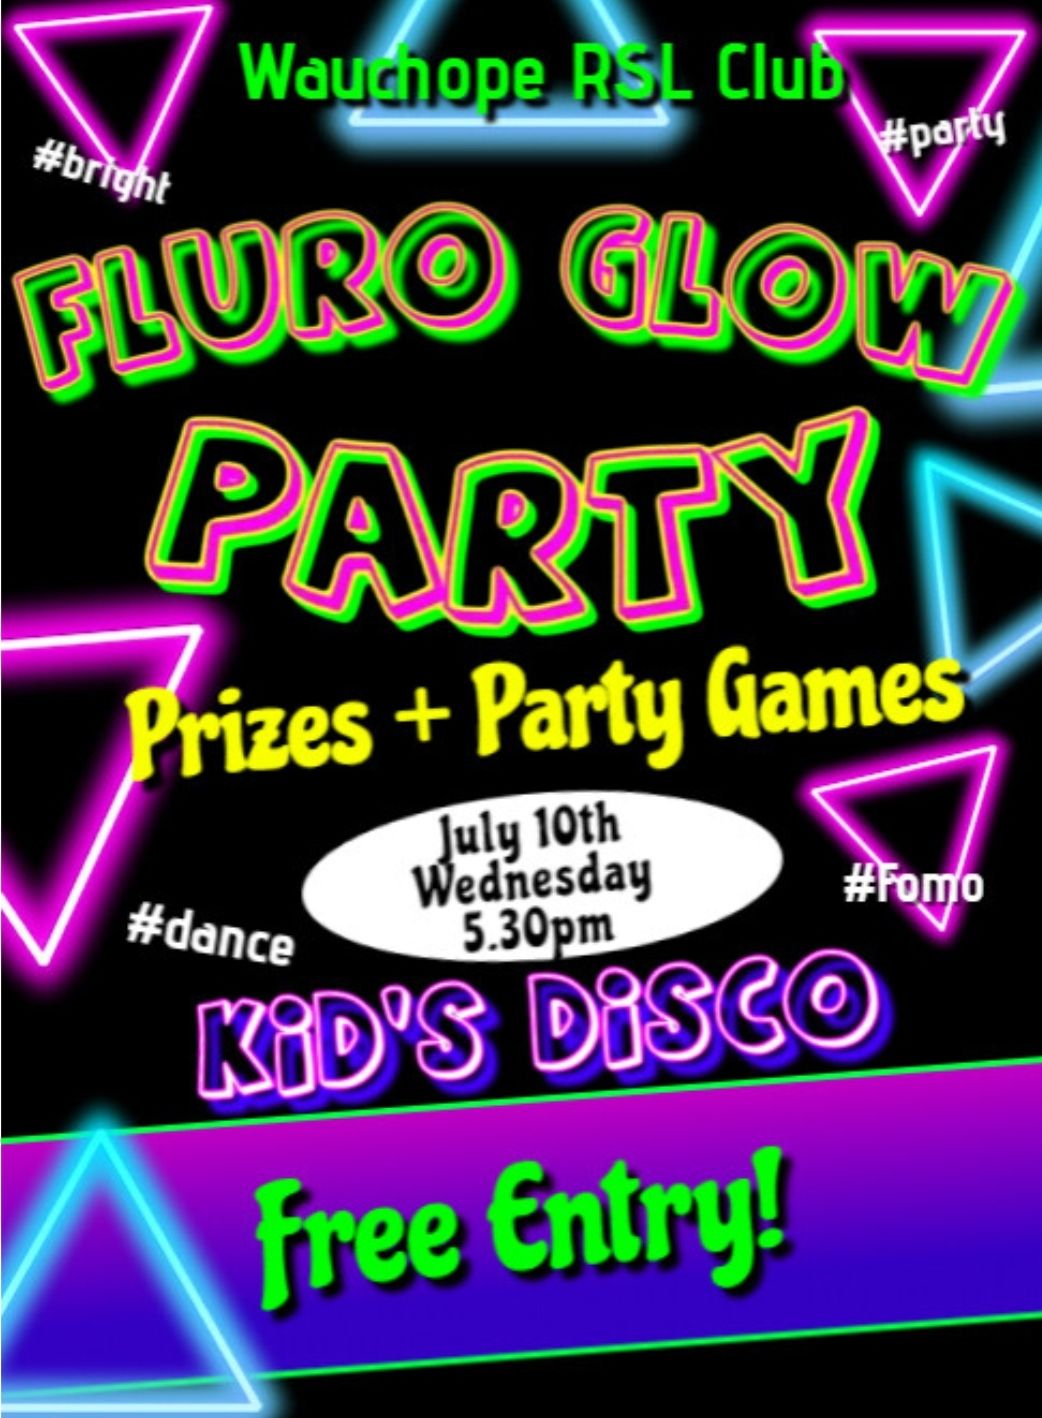 glow party